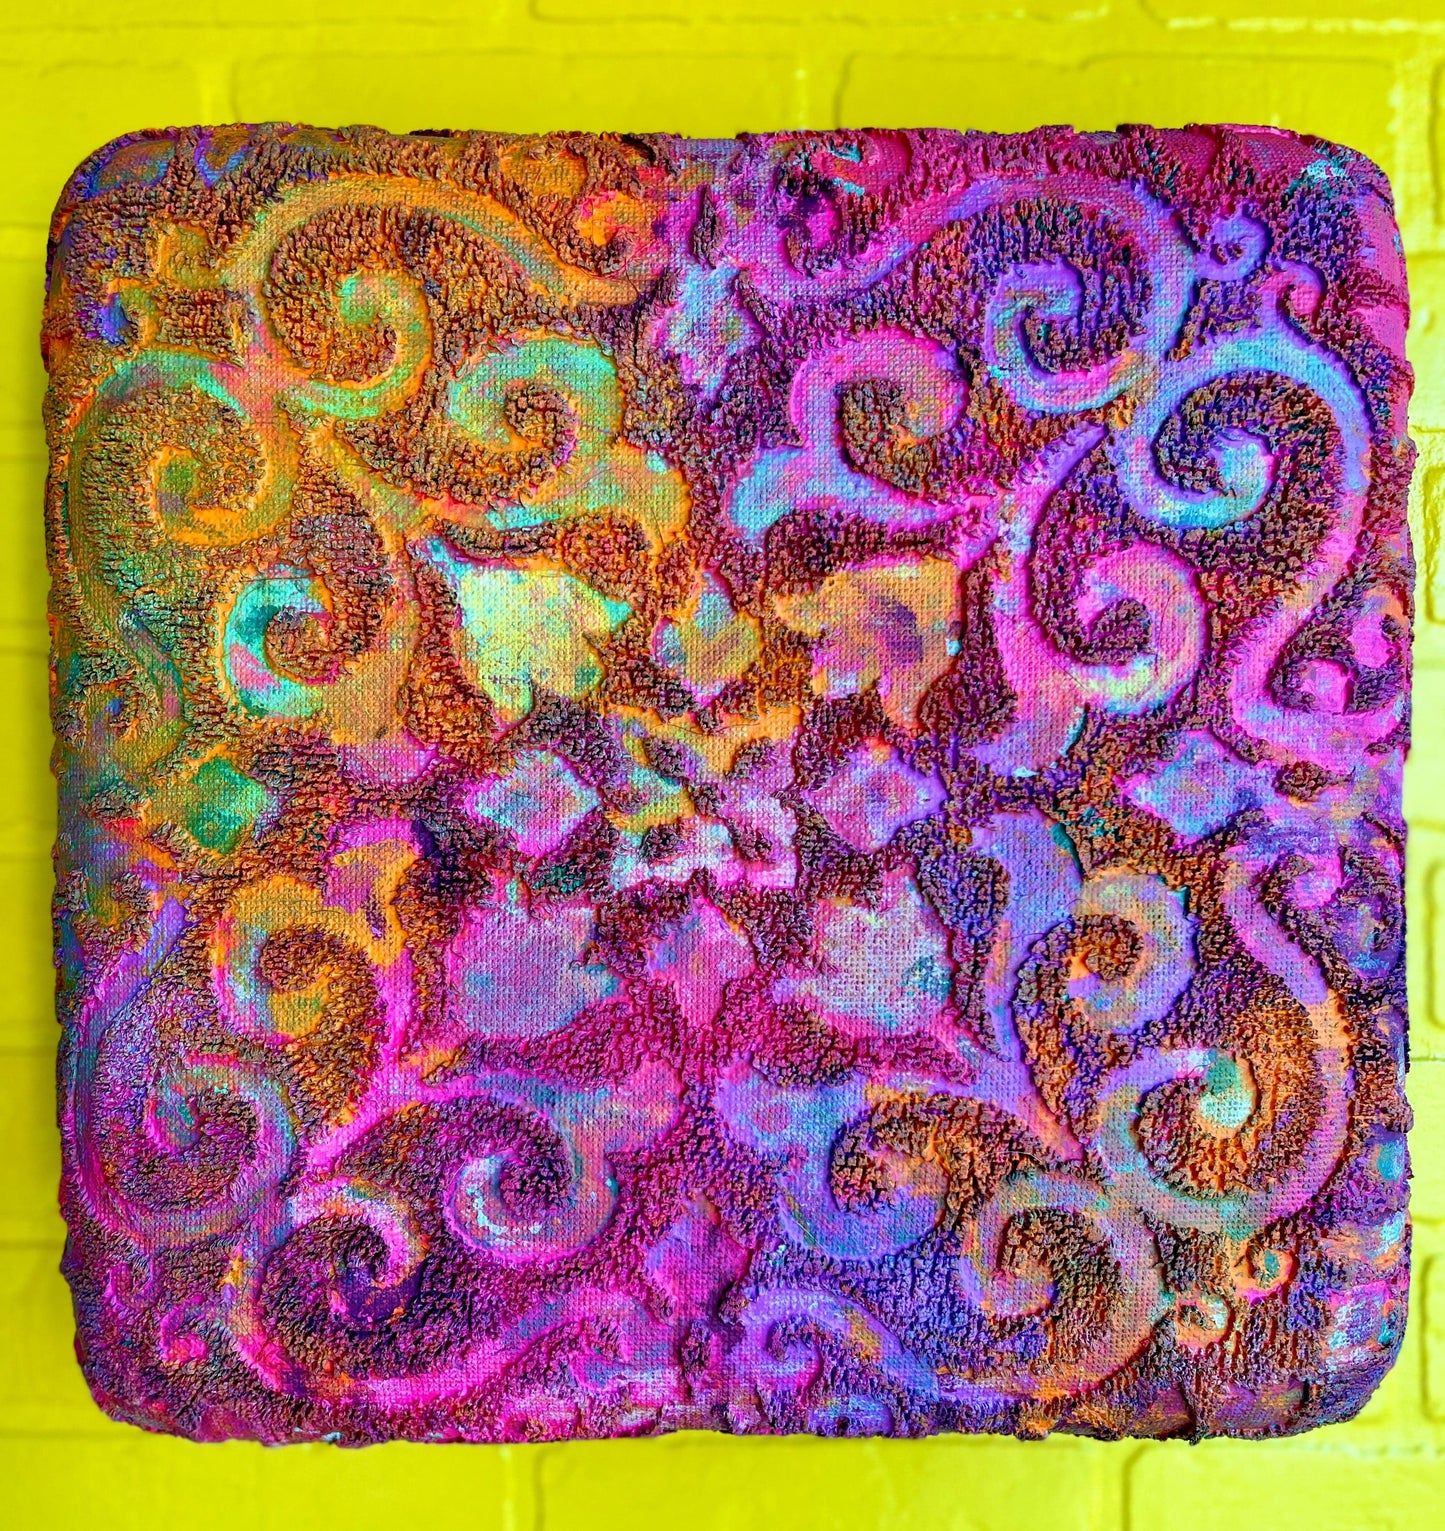 Tanglewood Works Original Art "Single Again" Upcycled Textile (Art it Out part 1)